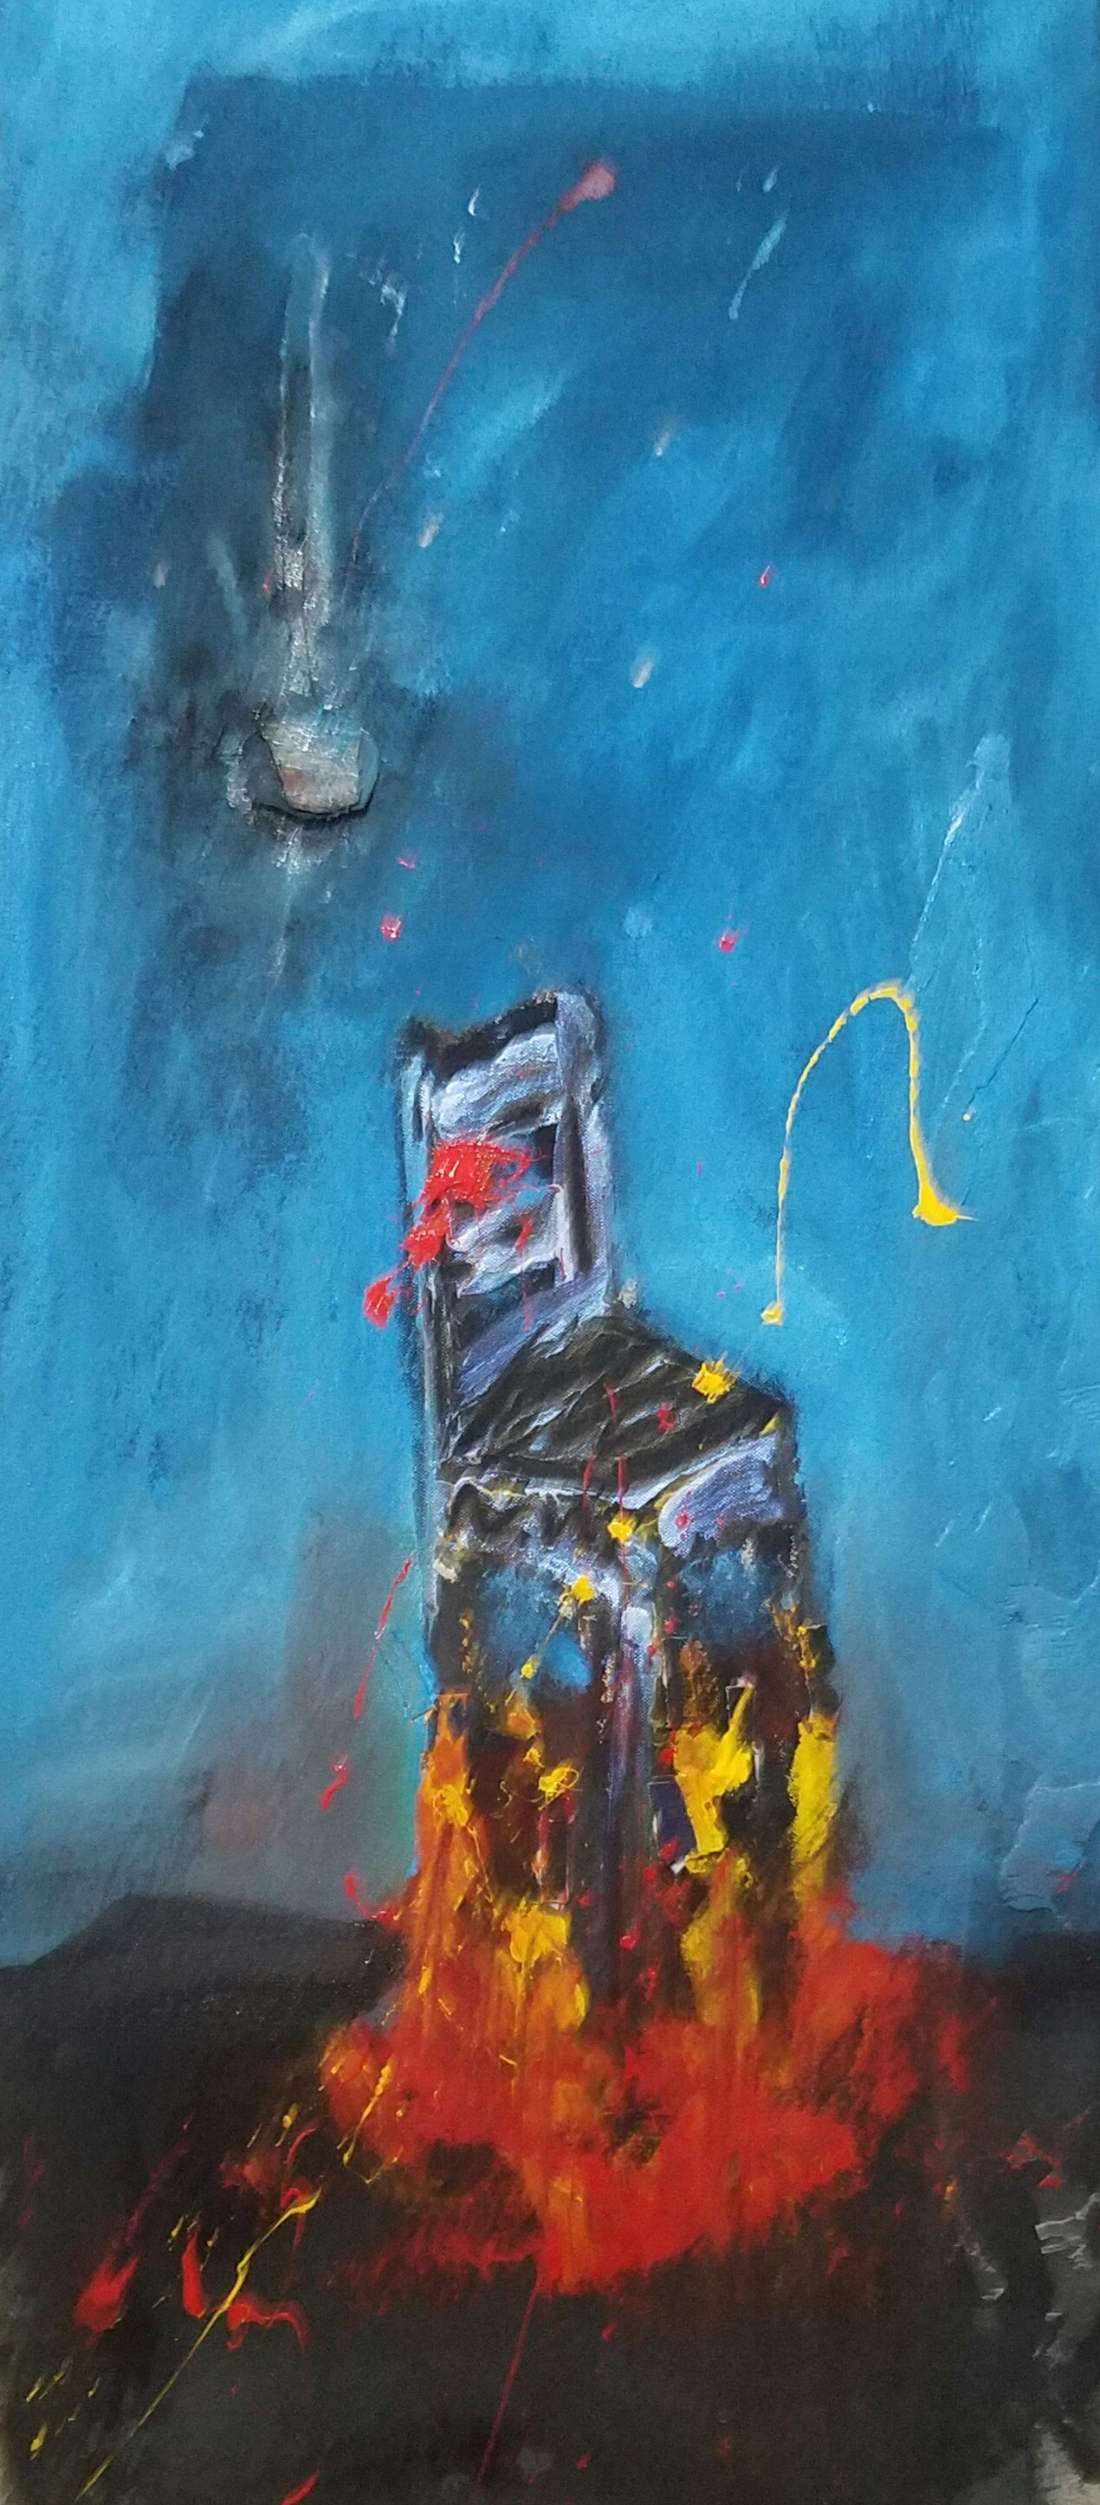 expressionistic painting of a straight chair with flames underneath